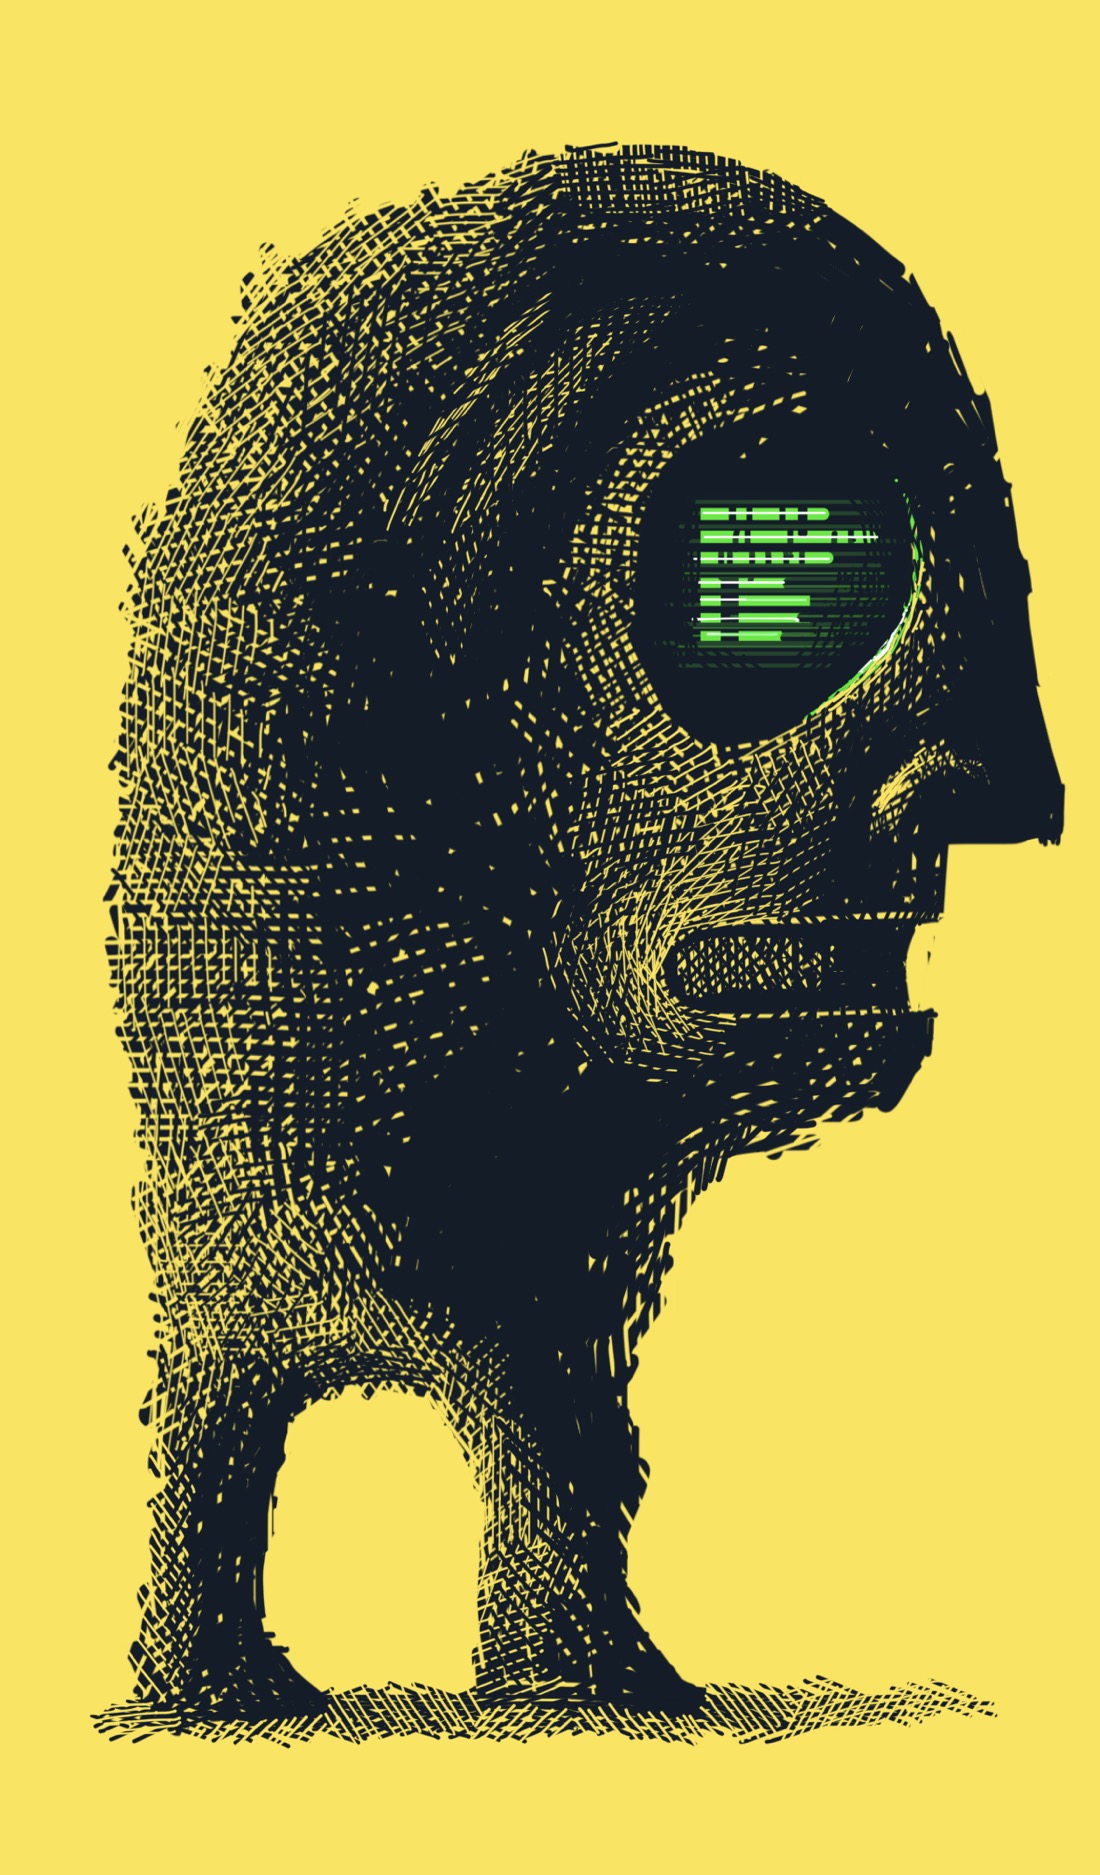 A giant head with two legs and no arms. The head looks like that of a robot: no hair, an oddly machinelike mouth, and a large eyesocket, which seems to be a computer screen displaying lines of glowing green text.